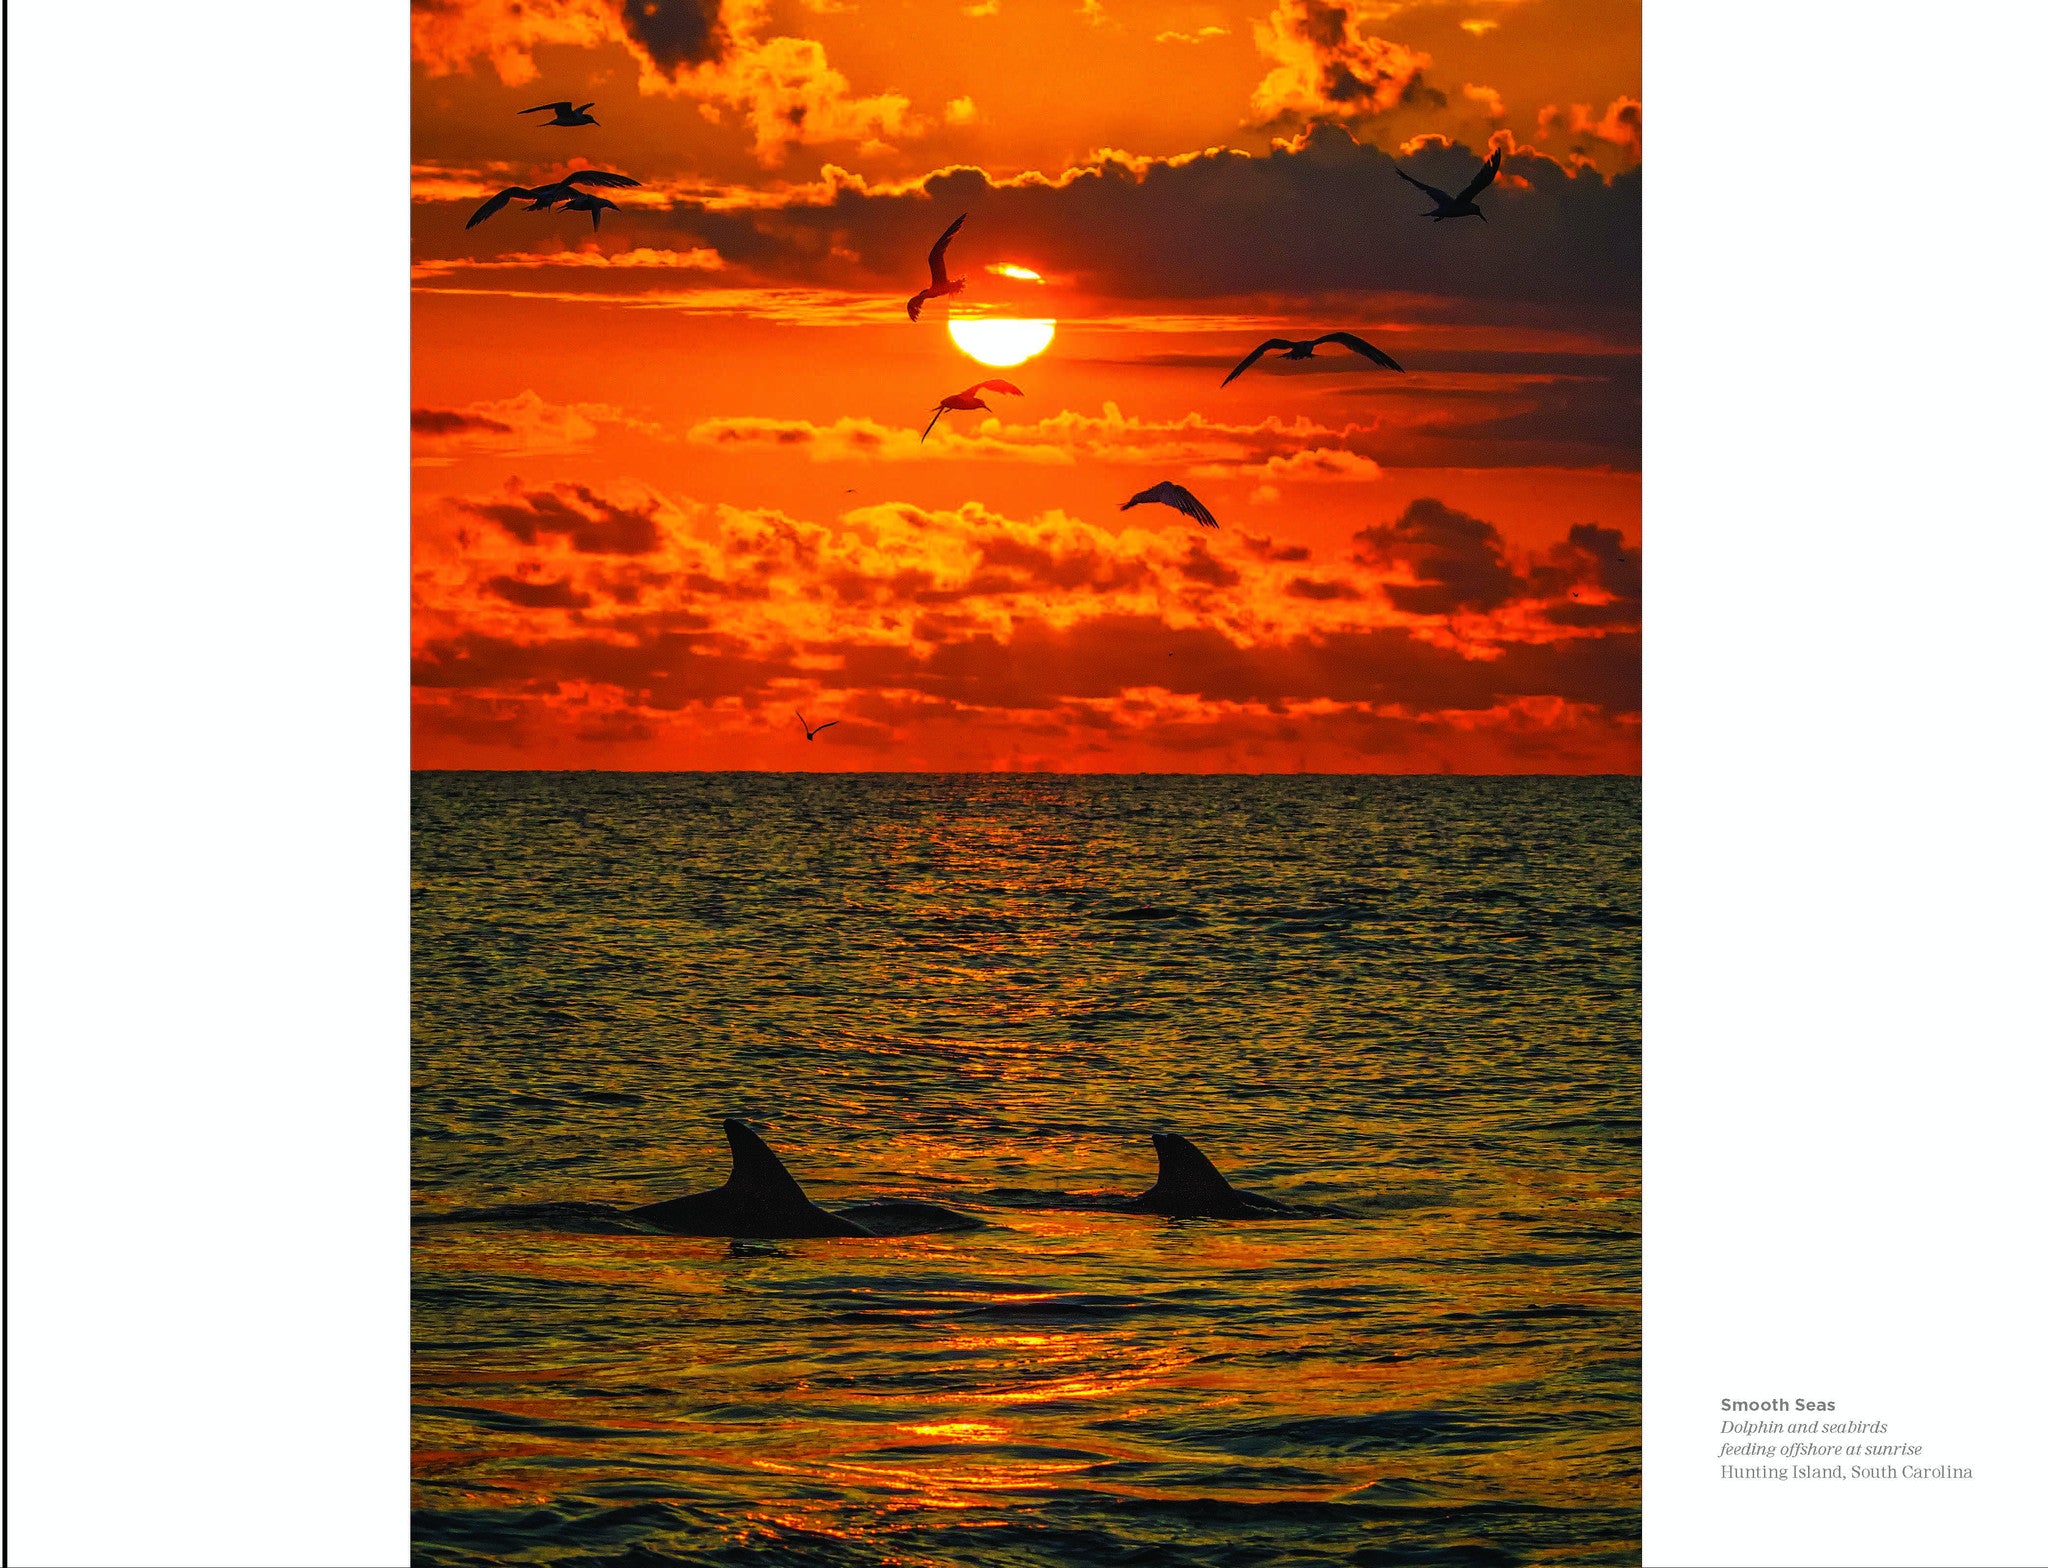 Smooth Seas: Dolphin and sea birds Hunting Island SC Beholding Nature Eric Horan photography book Starbooks